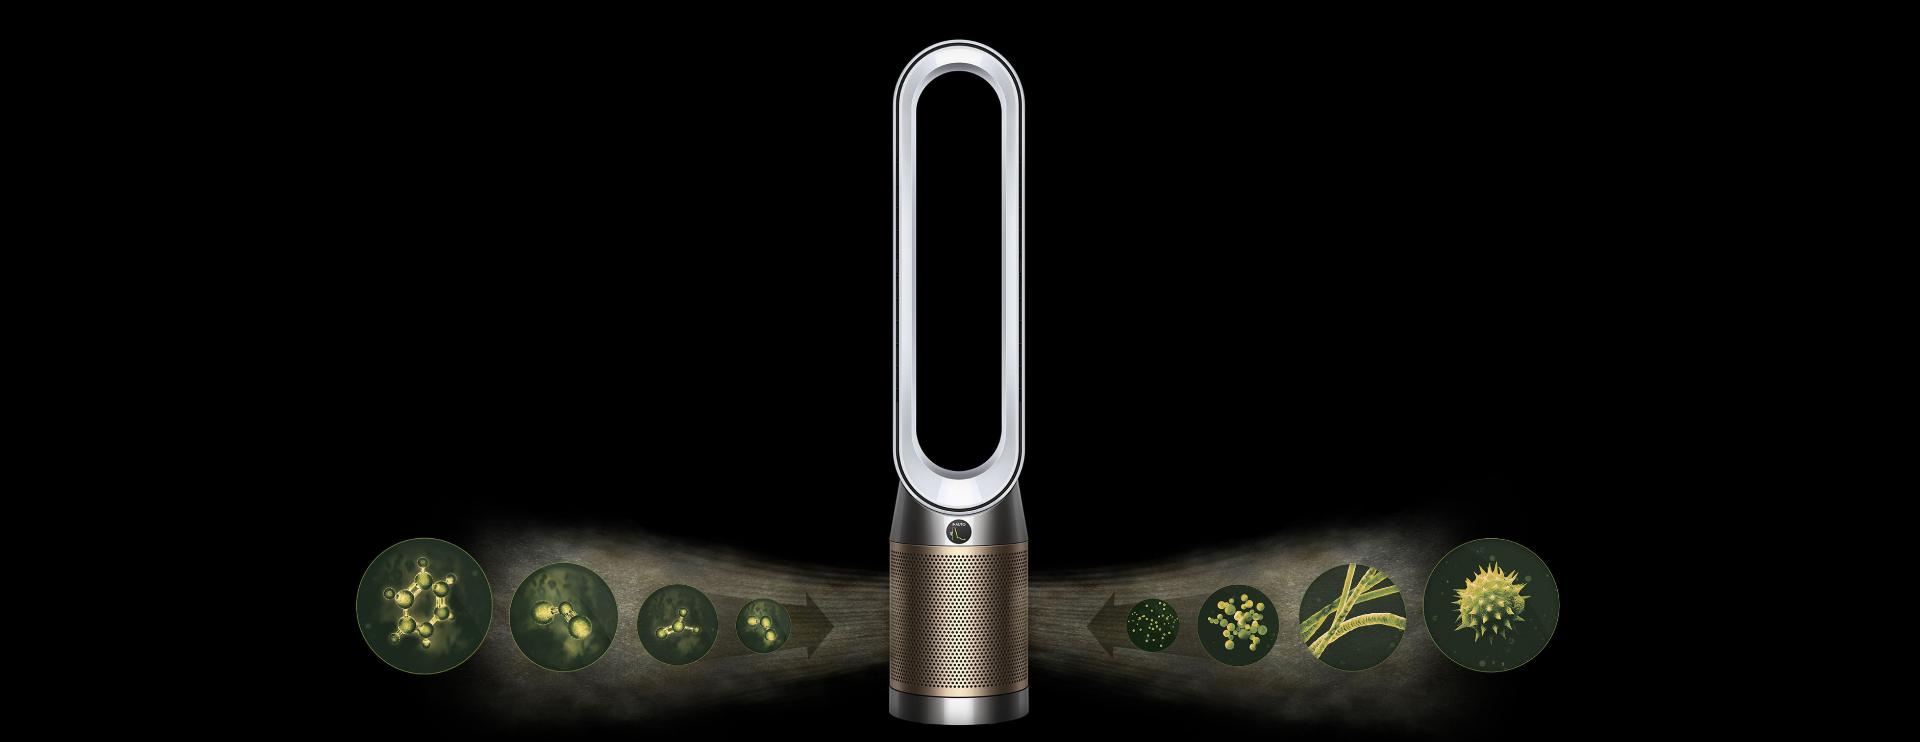  Dyson Purifier Cool Formaldehyde drawing in odours and pet hair to help with allergies